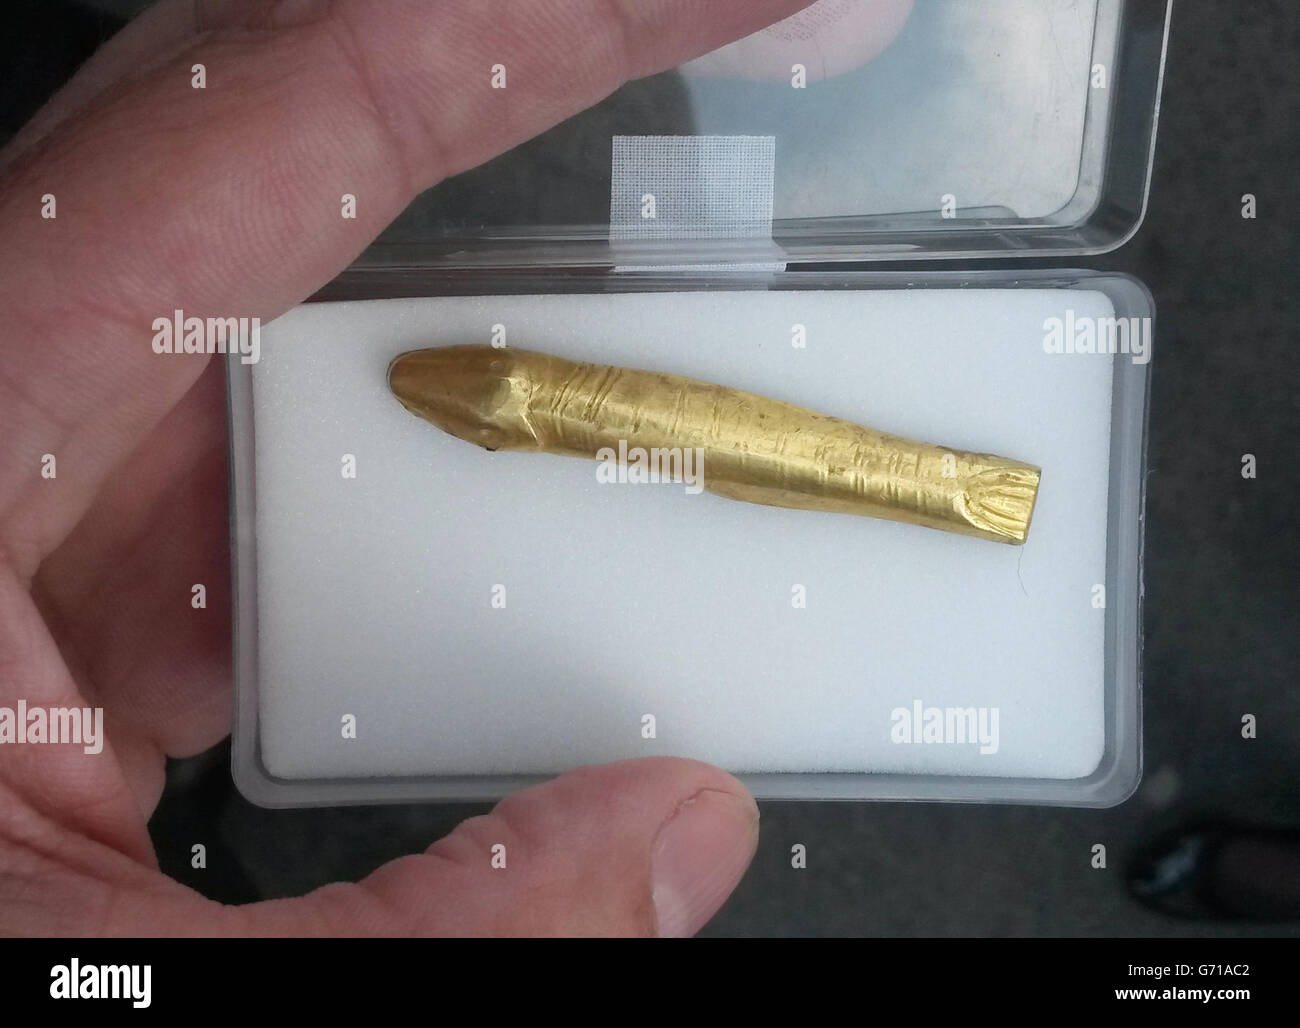 A rare golden fish, that experts believe is part of an ornate belt buckle, that was discovered by Barry Shannon whilst metal detecting on his aunt's farm in Ballyalton near Downpatrick last year, following a treasure inquest that declared the item to be treasure at the Belfast Coroner's Court. Stock Photo